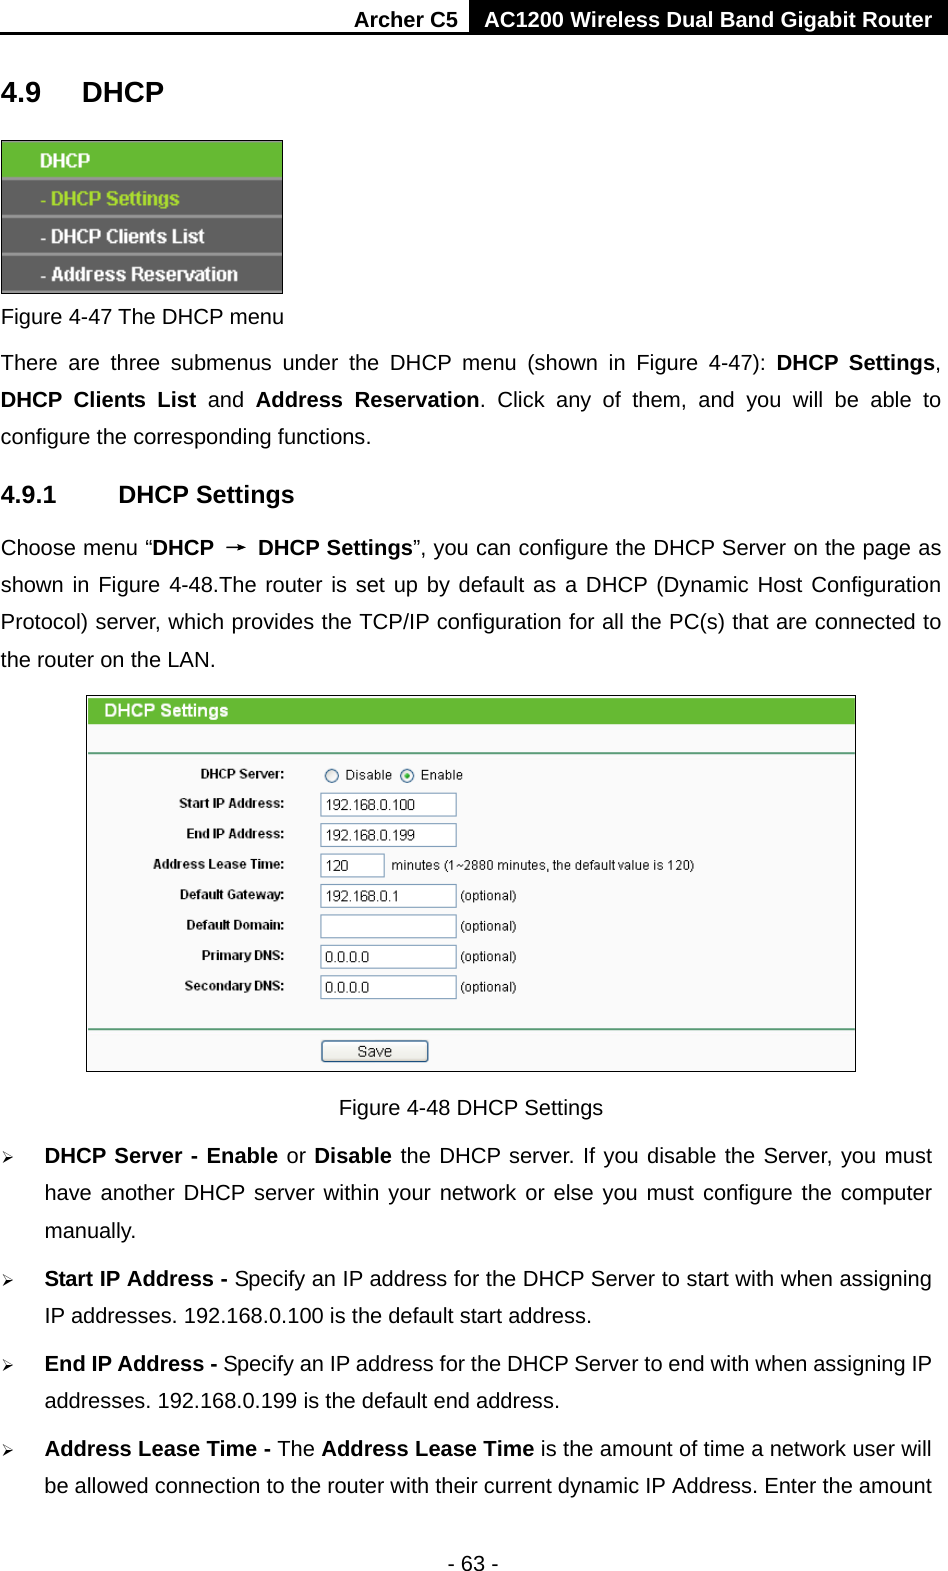 Archer C5 AC1200 Wireless Dual Band Gigabit Router  - 63 - 4.9 DHCP  Figure 4-47 The DHCP menu There are three submenus under the DHCP menu (shown in Figure  4-47):  DHCP Settings, DHCP Clients List and  Address Reservation. Click any of them, and you will be able to configure the corresponding functions. 4.9.1 DHCP Settings Choose menu “DHCP → DHCP Settings”, you can configure the DHCP Server on the page as shown in Figure 4-48.The router is set up by default as a DHCP (Dynamic Host Configuration Protocol) server, which provides the TCP/IP configuration for all the PC(s) that are connected to the router on the LAN.    Figure 4-48 DHCP Settings  DHCP Server - Enable or Disable the DHCP server. If you disable the Server, you must have another DHCP server within your network or else you must configure the computer manually.  Start IP Address - Specify an IP address for the DHCP Server to start with when assigning IP addresses. 192.168.0.100 is the default start address.  End IP Address - Specify an IP address for the DHCP Server to end with when assigning IP addresses. 192.168.0.199 is the default end address.  Address Lease Time - The Address Lease Time is the amount of time a network user will be allowed connection to the router with their current dynamic IP Address. Enter the amount 